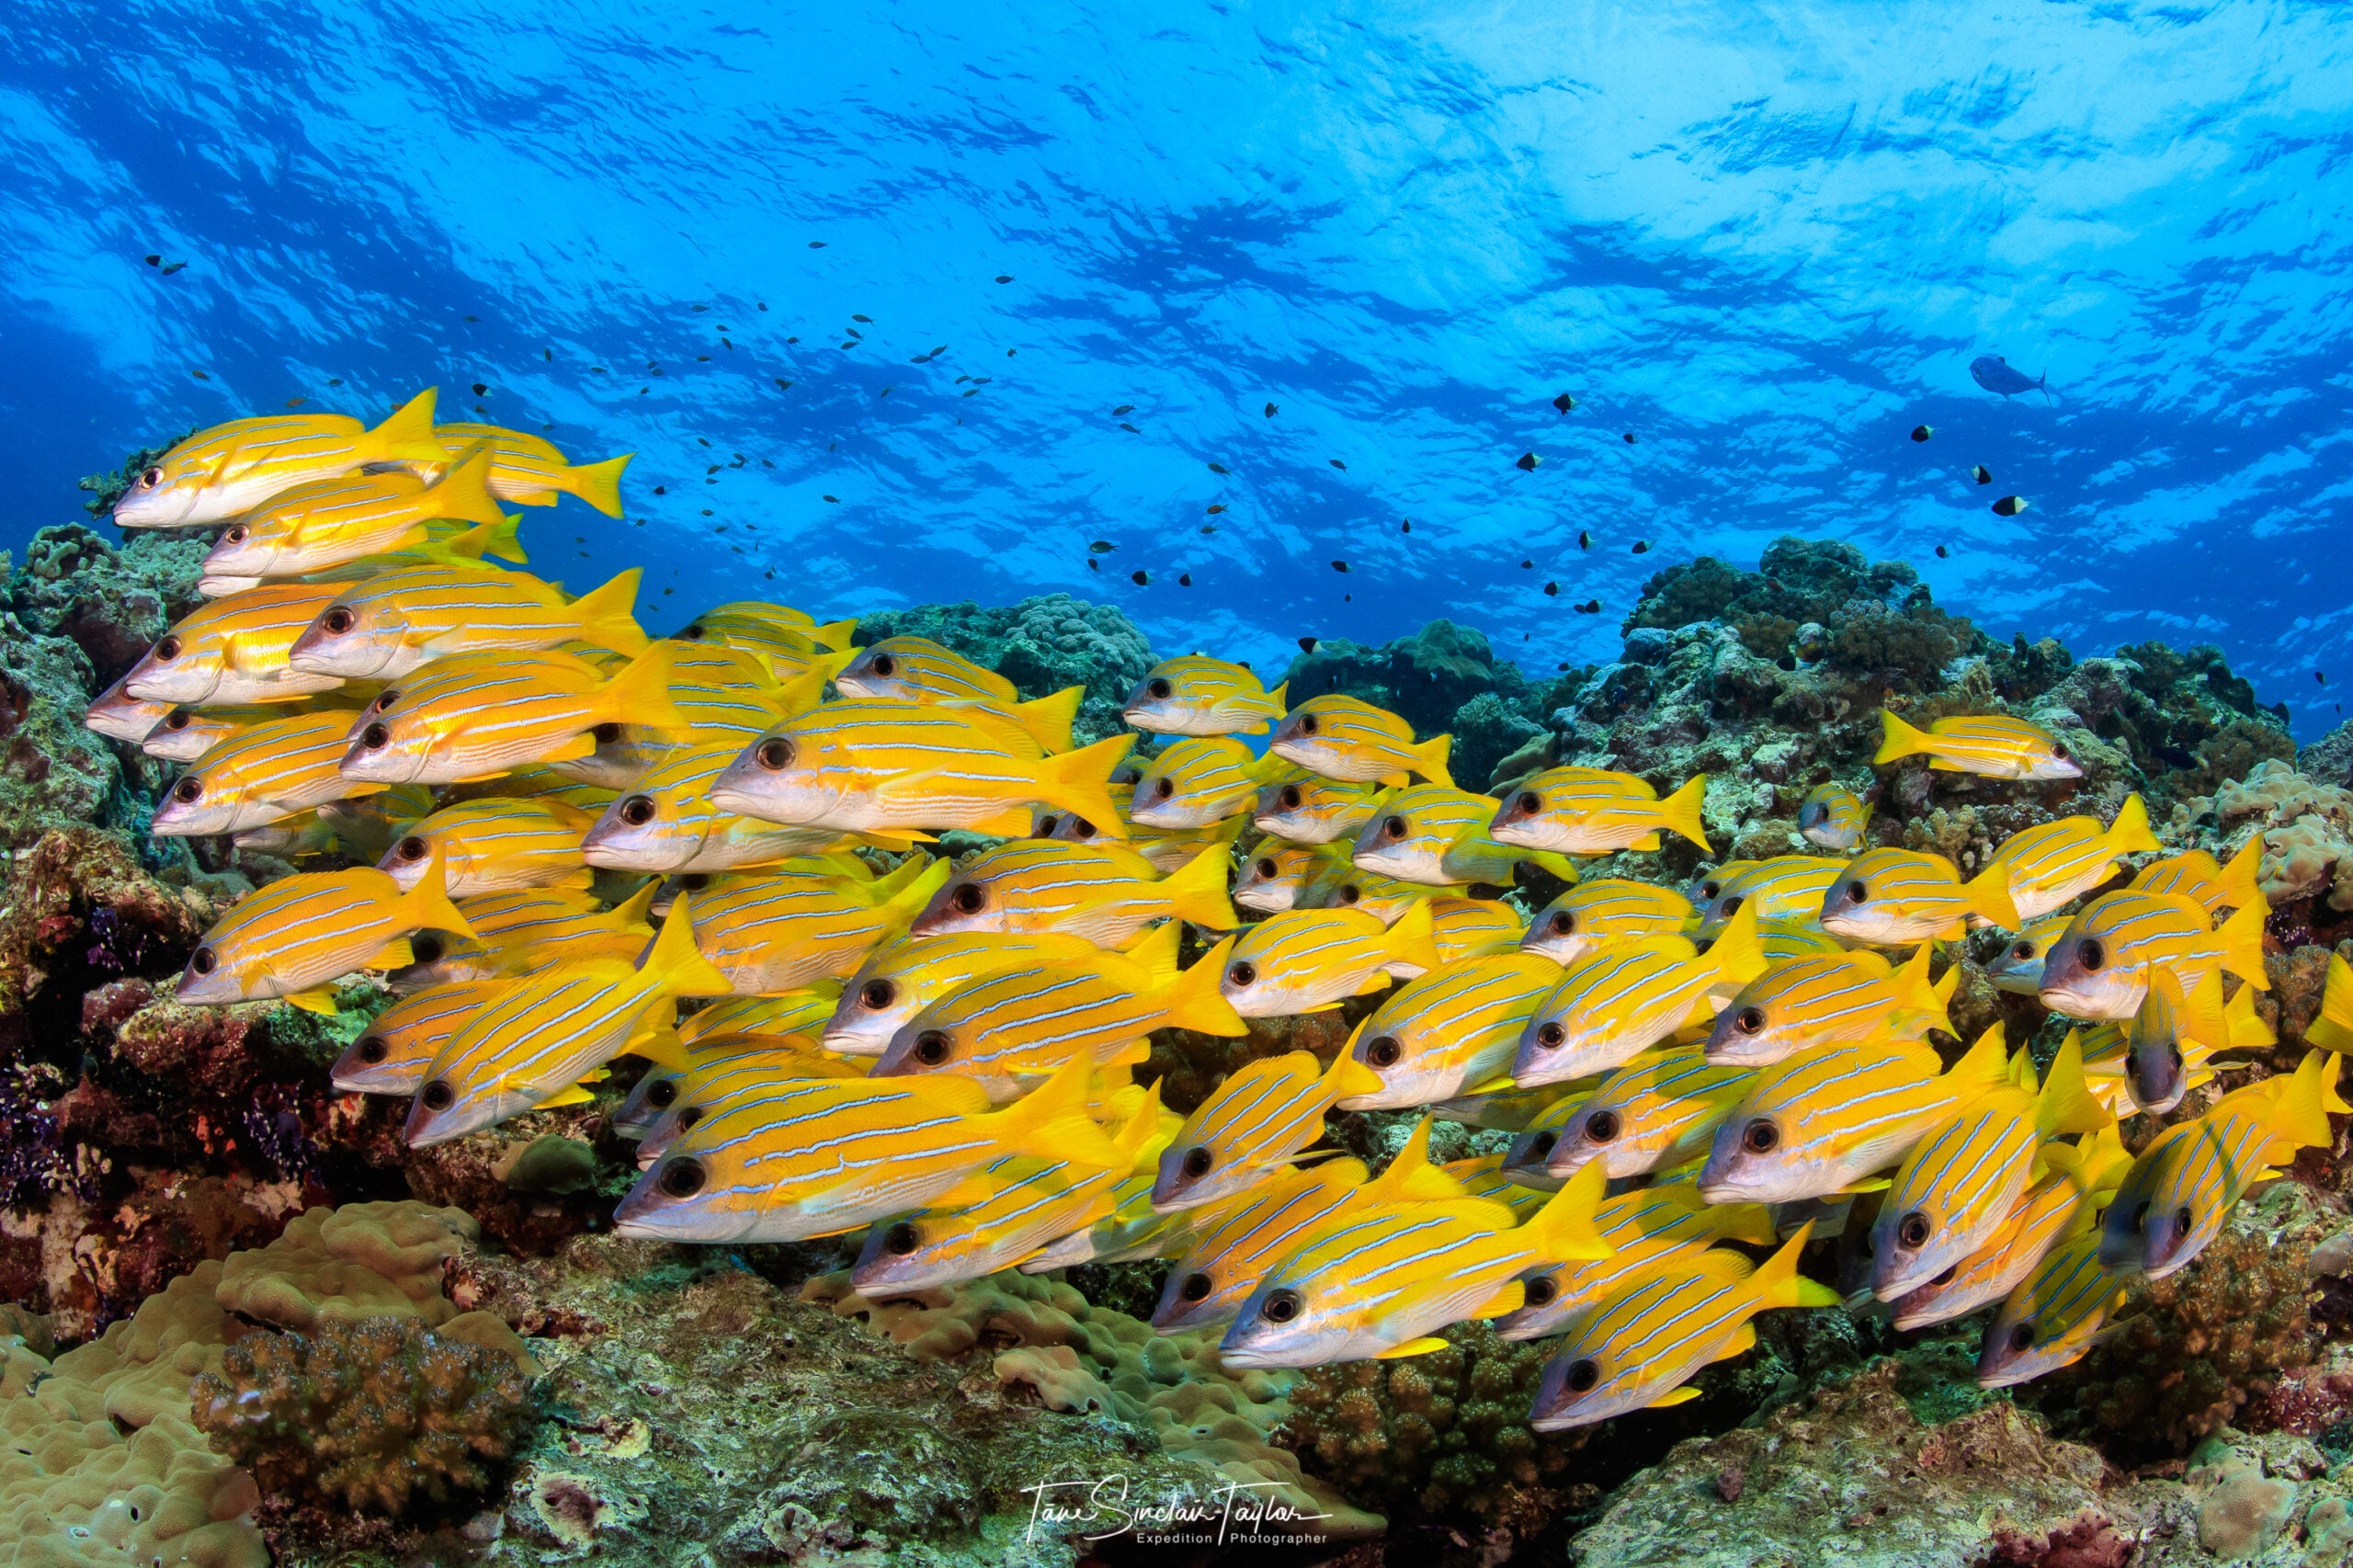 The hidden fish keeping coral reefs alive | Popular Science